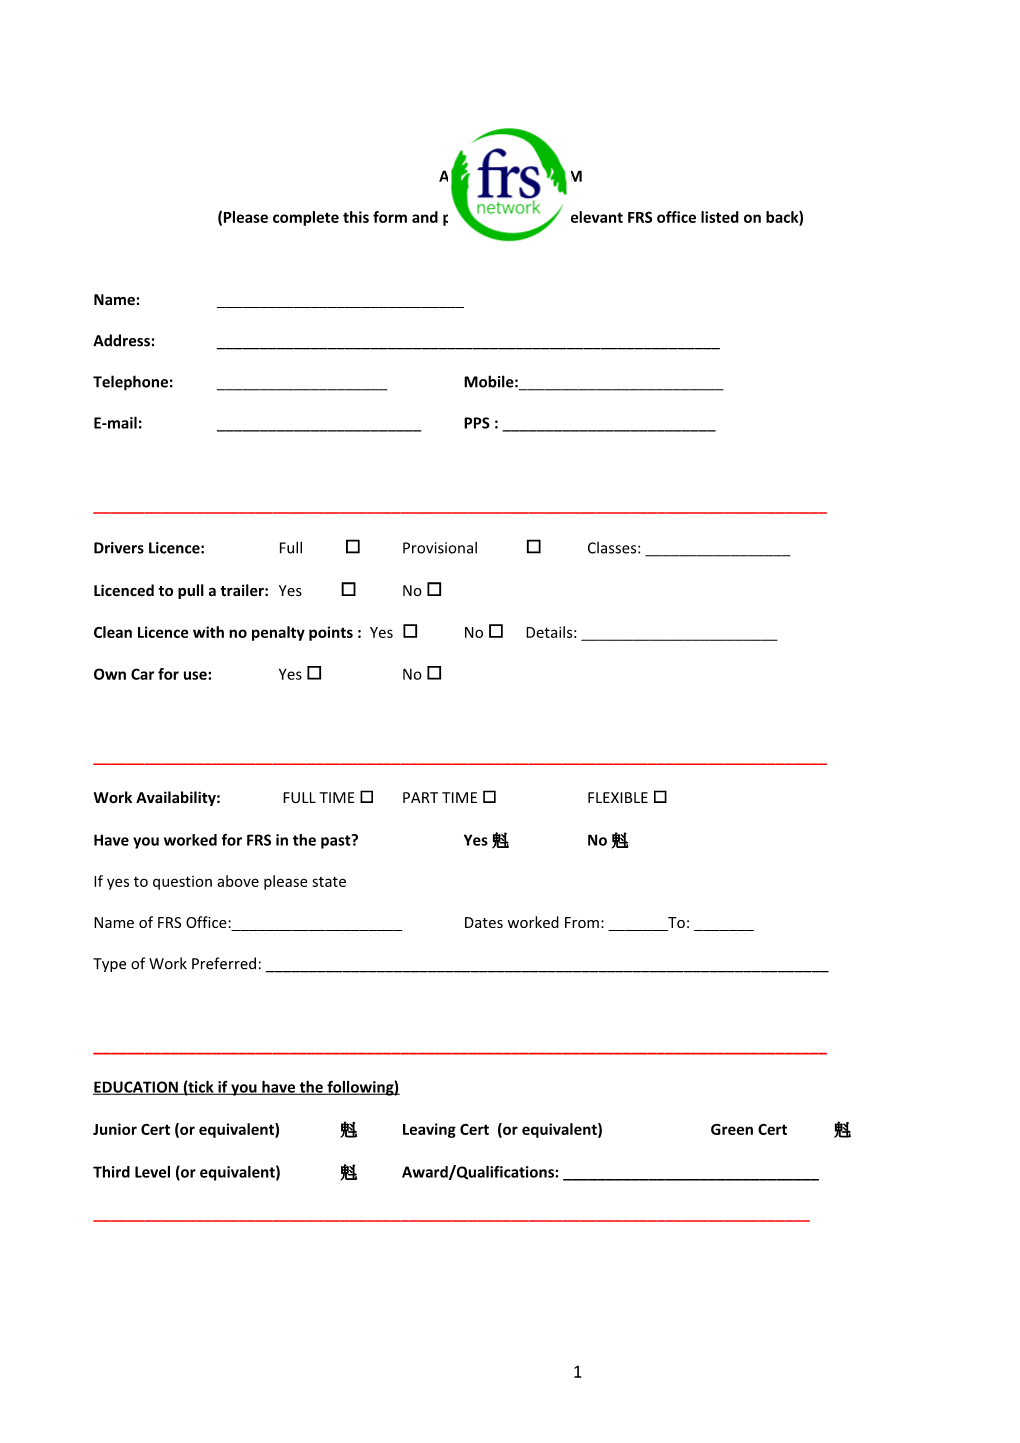 Please Complete This Form and Post Or E-Mail to Relevant FRS Office Listed on Back